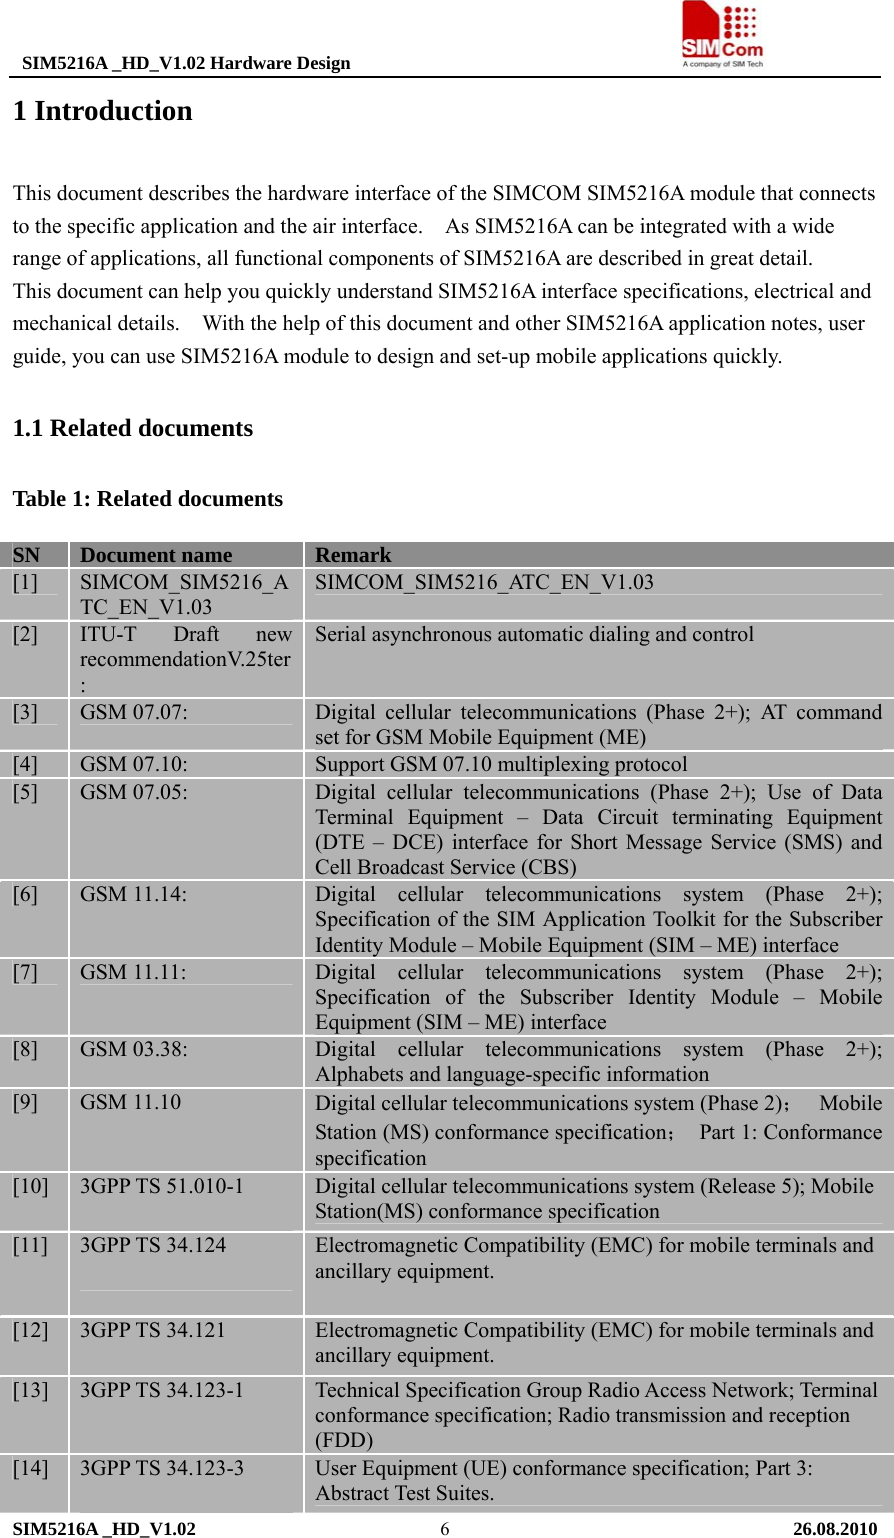  SIM5216A _HD_V1.02 Hardware Design                                     SIM5216A _HD_V1.02   26.08.2010   61 Introduction This document describes the hardware interface of the SIMCOM SIM5216A module that connects to the specific application and the air interface.    As SIM5216A can be integrated with a wide range of applications, all functional components of SIM5216A are described in great detail.   This document can help you quickly understand SIM5216A interface specifications, electrical and mechanical details.    With the help of this document and other SIM5216A application notes, user guide, you can use SIM5216A module to design and set-up mobile applications quickly. 1.1 Related documents Table 1: Related documents SN  Document name  Remark [1]  SIMCOM_SIM5216_ATC_EN_V1.03 SIMCOM_SIM5216_ATC_EN_V1.03 [2]  ITU-T Draft new recommendationV.25ter: Serial asynchronous automatic dialing and control [3]  GSM 07.07:  Digital cellular telecommunications (Phase 2+); AT command set for GSM Mobile Equipment (ME) [4]  GSM 07.10:  Support GSM 07.10 multiplexing protocol   [5]  GSM 07.05:  Digital cellular telecommunications (Phase 2+); Use of Data Terminal Equipment – Data Circuit terminating Equipment (DTE – DCE) interface for Short Message Service (SMS) and Cell Broadcast Service (CBS) [6]  GSM 11.14:  Digital cellular telecommunications system (Phase 2+); Specification of the SIM Application Toolkit for the Subscriber Identity Module – Mobile Equipment (SIM – ME) interface [7]  GSM 11.11:  Digital cellular telecommunications system (Phase 2+); Specification of the Subscriber Identity Module – Mobile Equipment (SIM – ME) interface [8]  GSM 03.38:  Digital cellular telecommunications system (Phase 2+); Alphabets and language-specific information [9]  GSM 11.10  Digital cellular telecommunications system (Phase 2)；  Mobile Station (MS) conformance specification； Part 1: Conformance specification [10]  3GPP TS 51.010-1  Digital cellular telecommunications system (Release 5); Mobile Station(MS) conformance specification [11]  3GPP TS 34.124  Electromagnetic Compatibility (EMC) for mobile terminals and ancillary equipment.  [12]  3GPP TS 34.121  Electromagnetic Compatibility (EMC) for mobile terminals and ancillary equipment. [13]  3GPP TS 34.123-1  Technical Specification Group Radio Access Network; Terminal conformance specification; Radio transmission and reception (FDD) [14]  3GPP TS 34.123-3  User Equipment (UE) conformance specification; Part 3: Abstract Test Suites. 